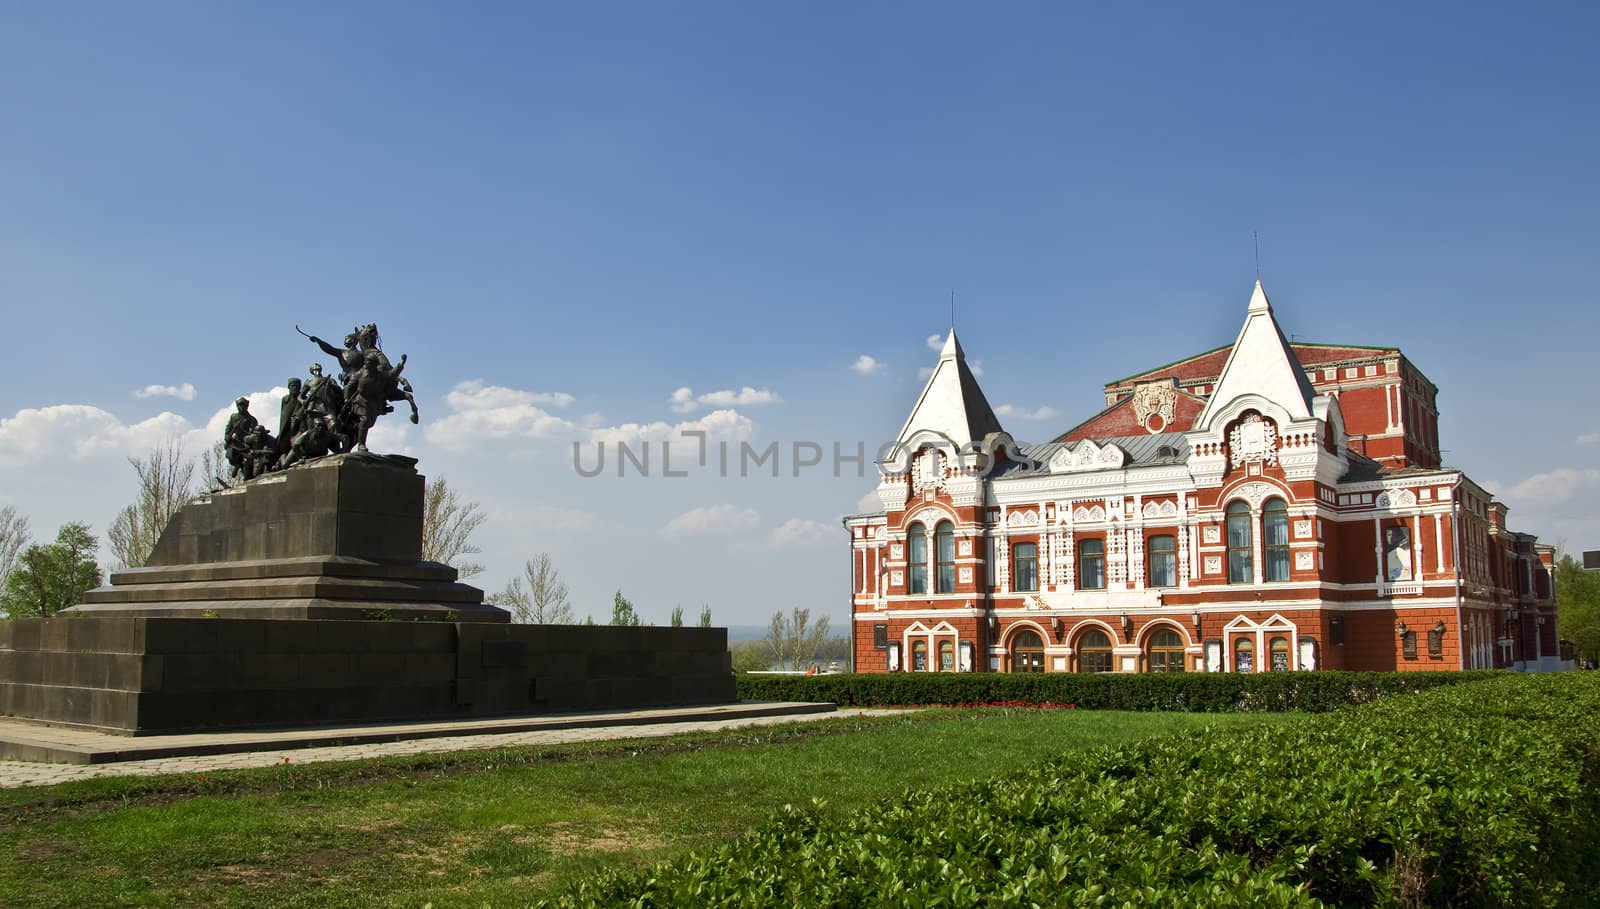 Building of the Drama Theatre, built in traditional Russian style and monument to the cavalry. Urban landscape. Russia, Samara.
